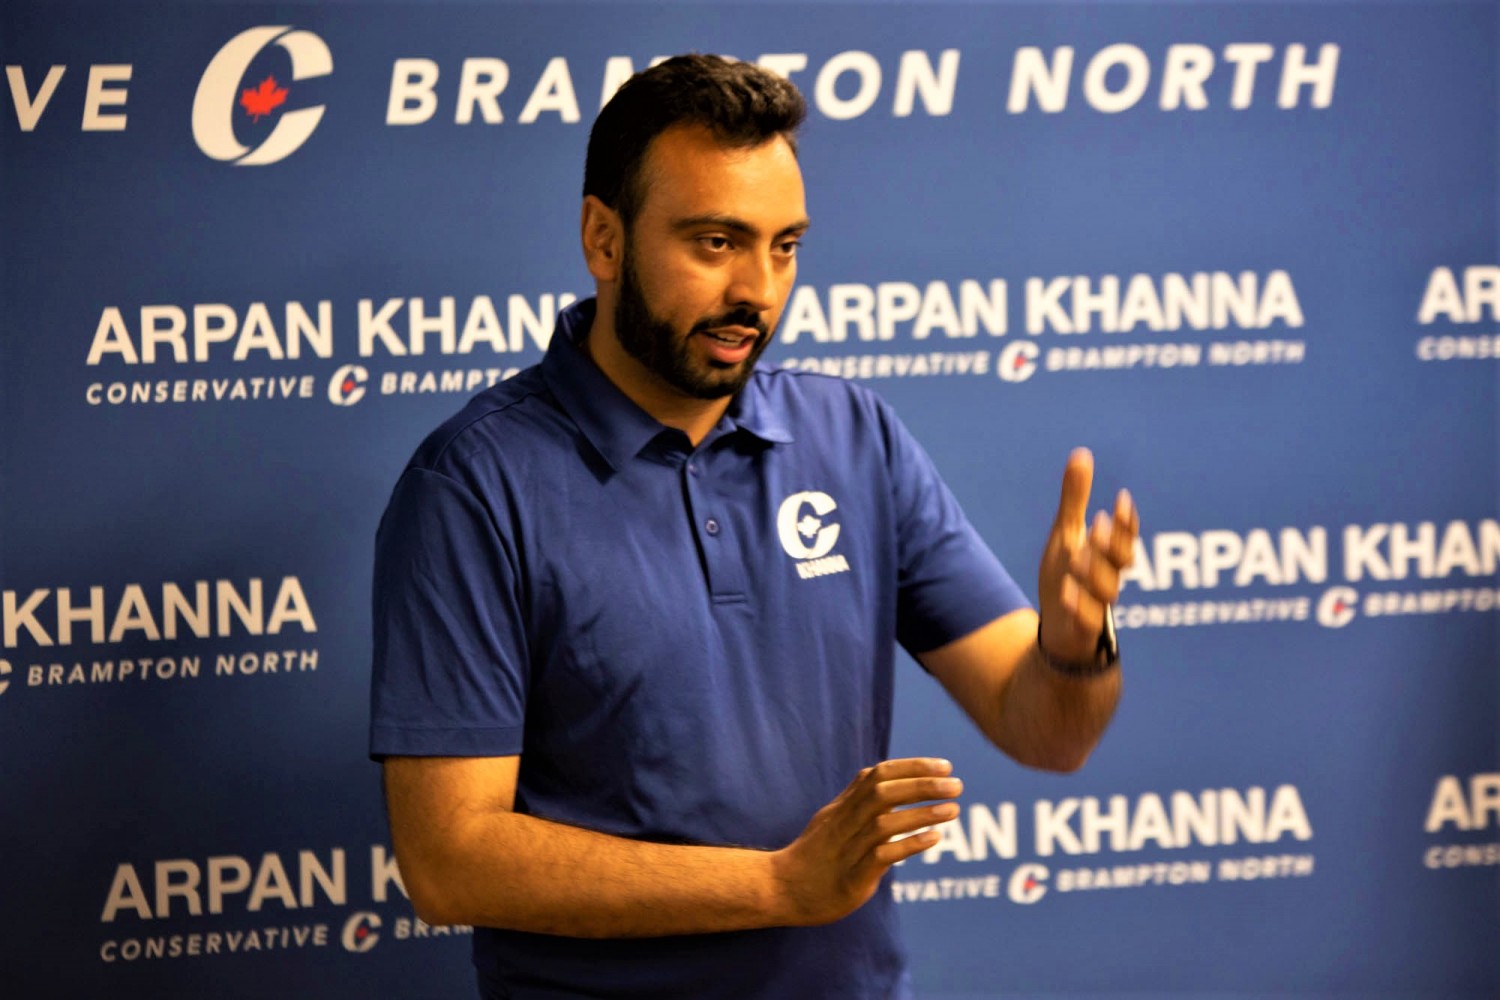 Brampton North Conservative candidate Arpan Khanna sticks with Tory talking points while touting working-class, immigrant credentials 